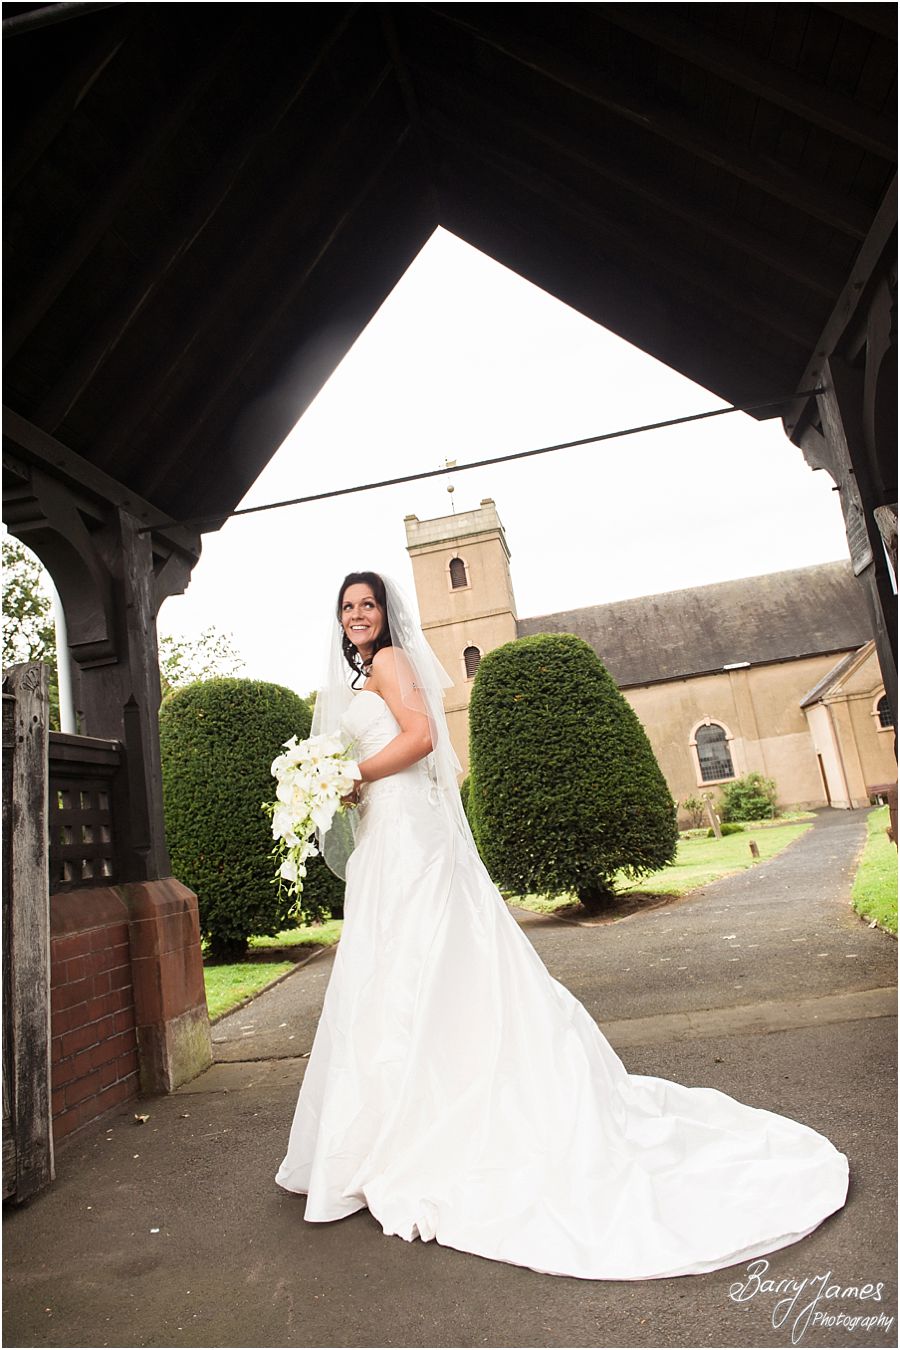 Creative wedding photography at Himley Church in Dudley by Staffordshire Wedding Photographer Barry James